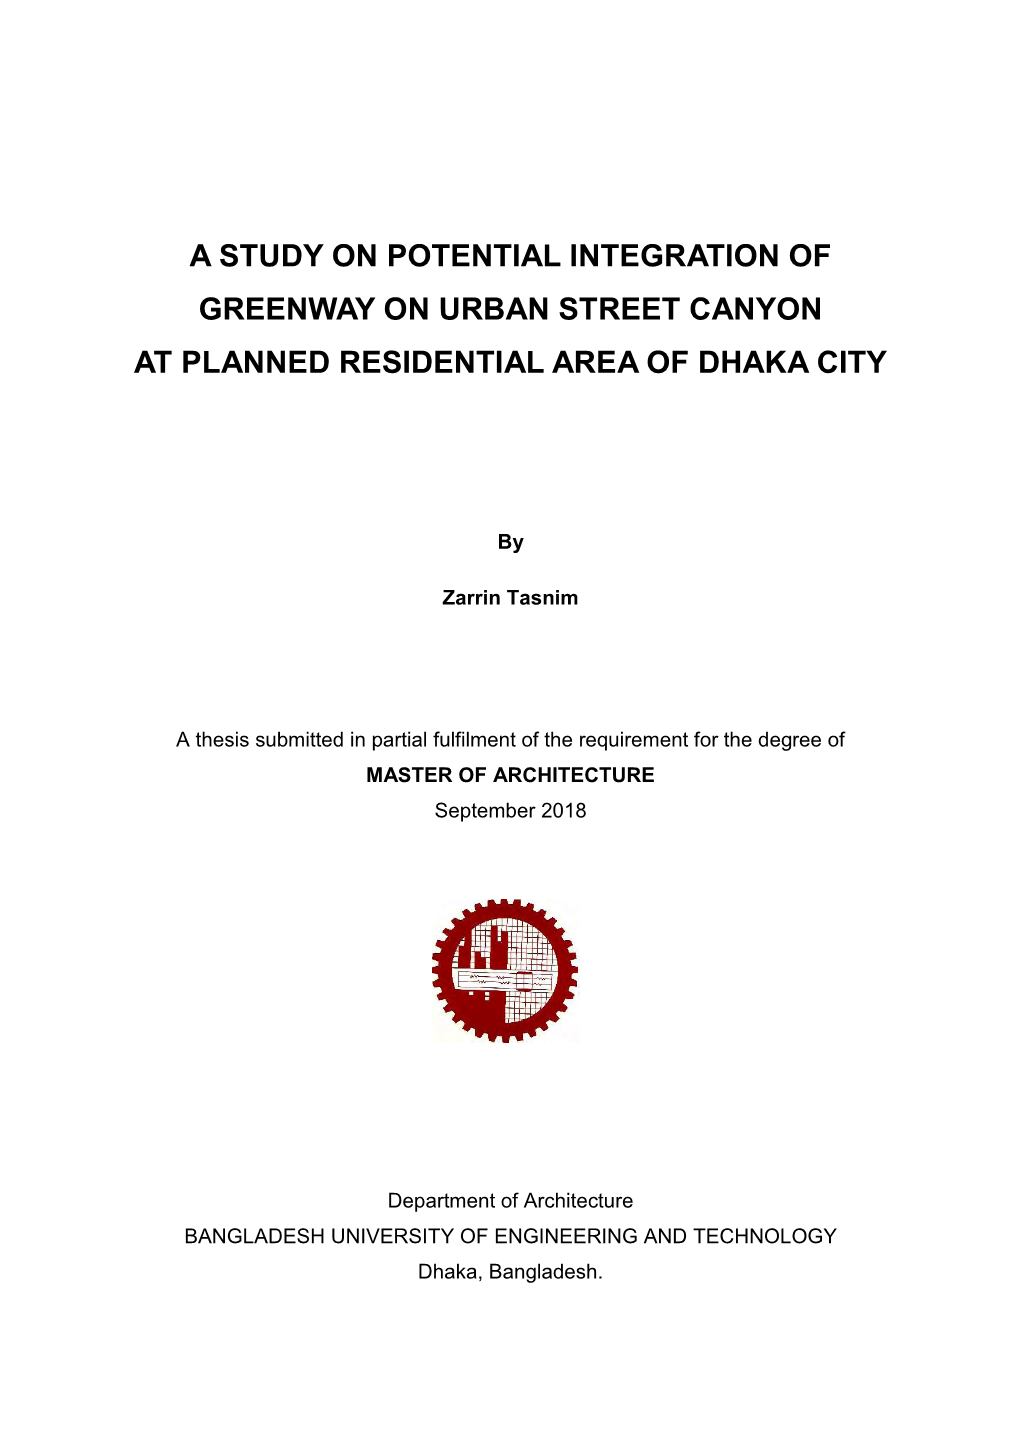 A Study on Potential Integration of Greenway on Urban Street Canyon at Planned Residential Area of Dhaka City